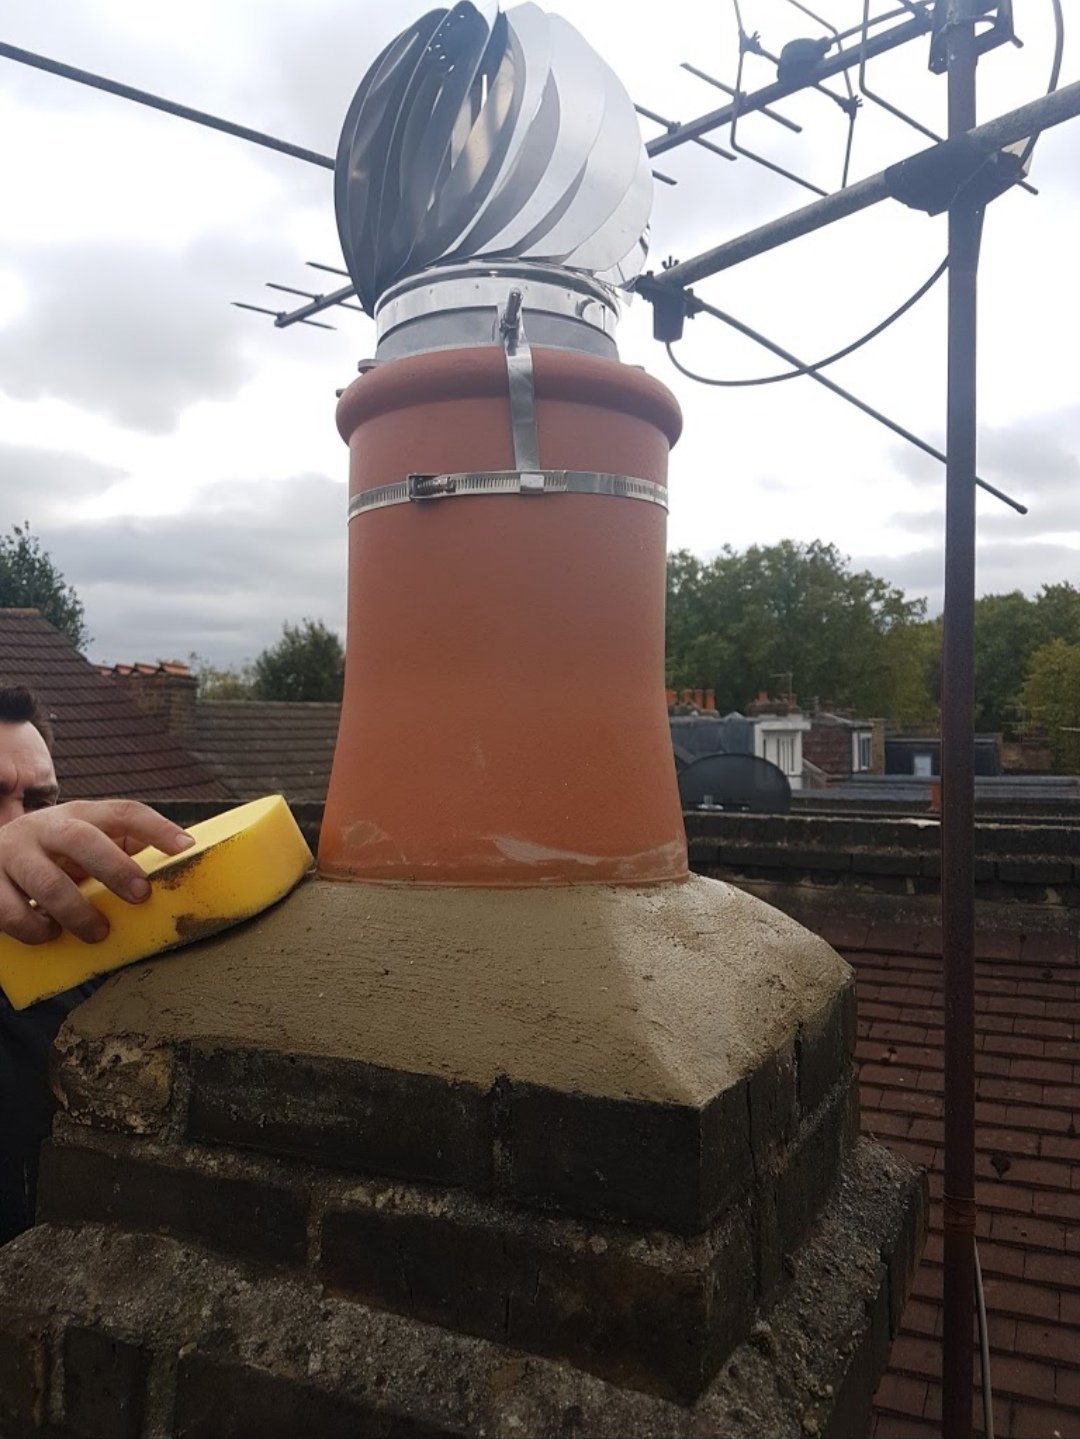 Chimney pot installation in Torquay, Paignton and Brixham by Hodgsons Chimney Sweeps